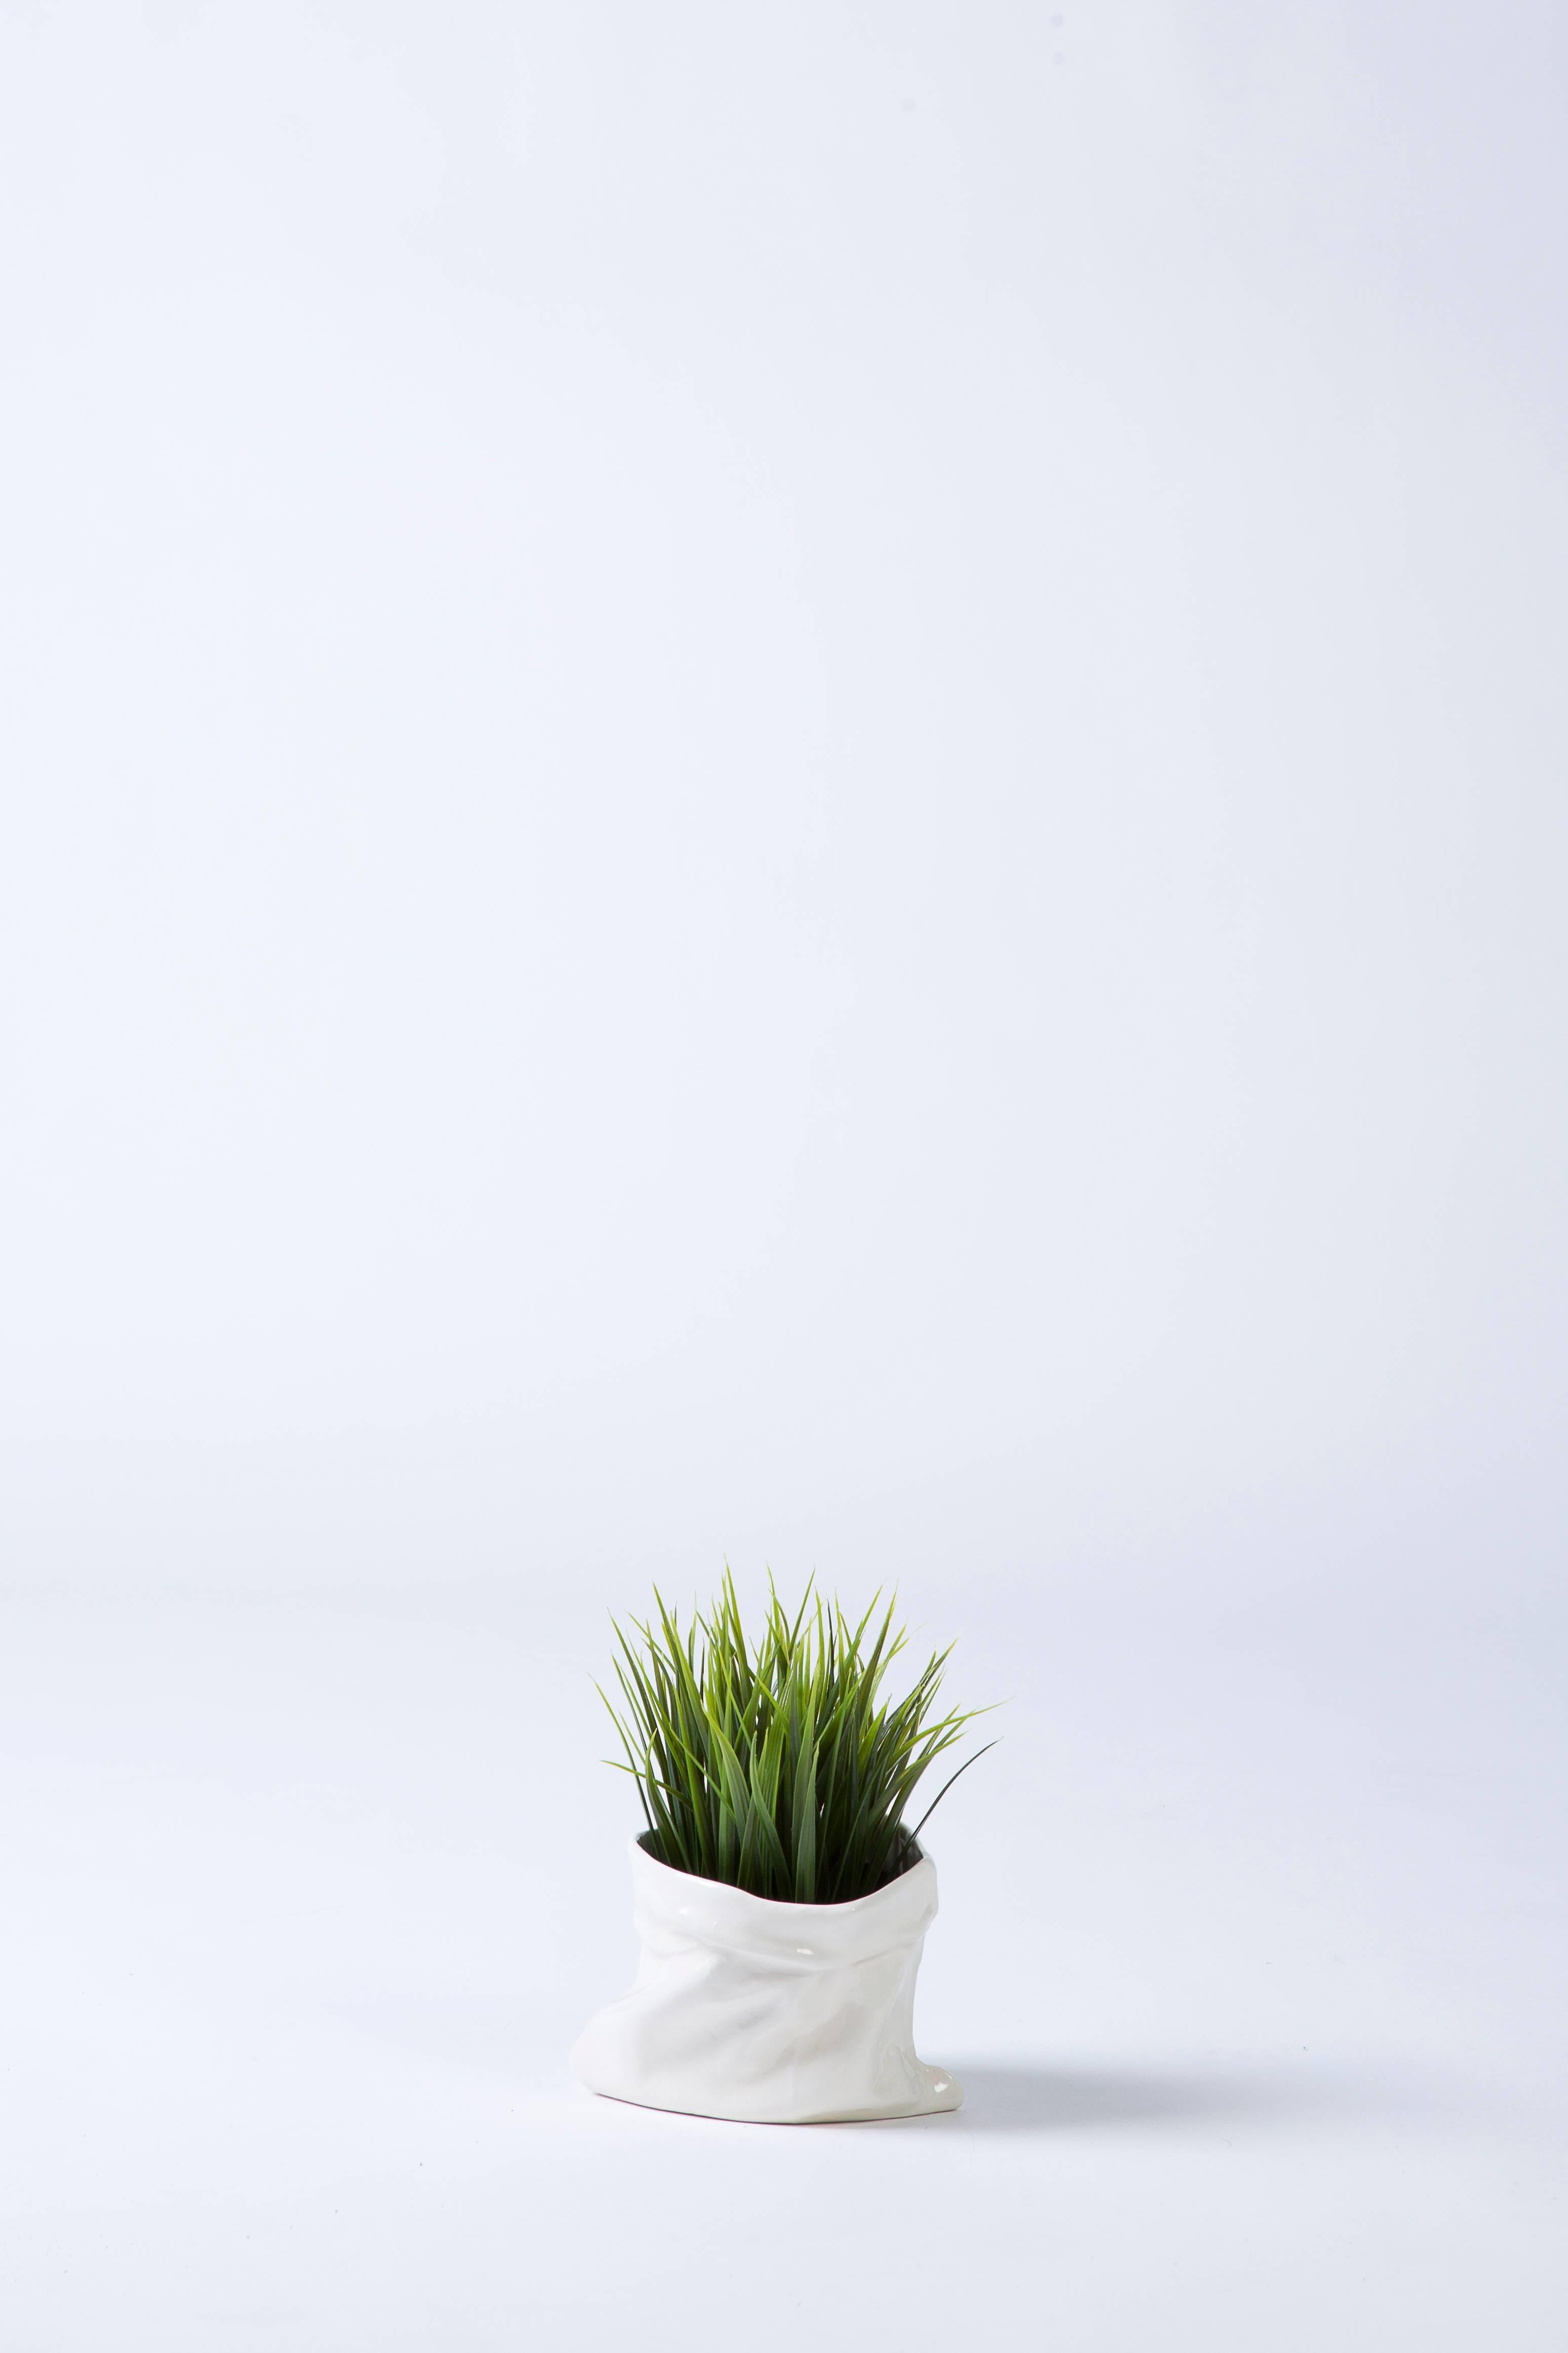 This stand-alone planter, inspired by our 'Worn Planter', uses ceramic to simulate the elegant folds and textures of the well-worn fabrics we use for the other pieces in our 'Worn' collection.  

The planter pairs particularly well with succulents,